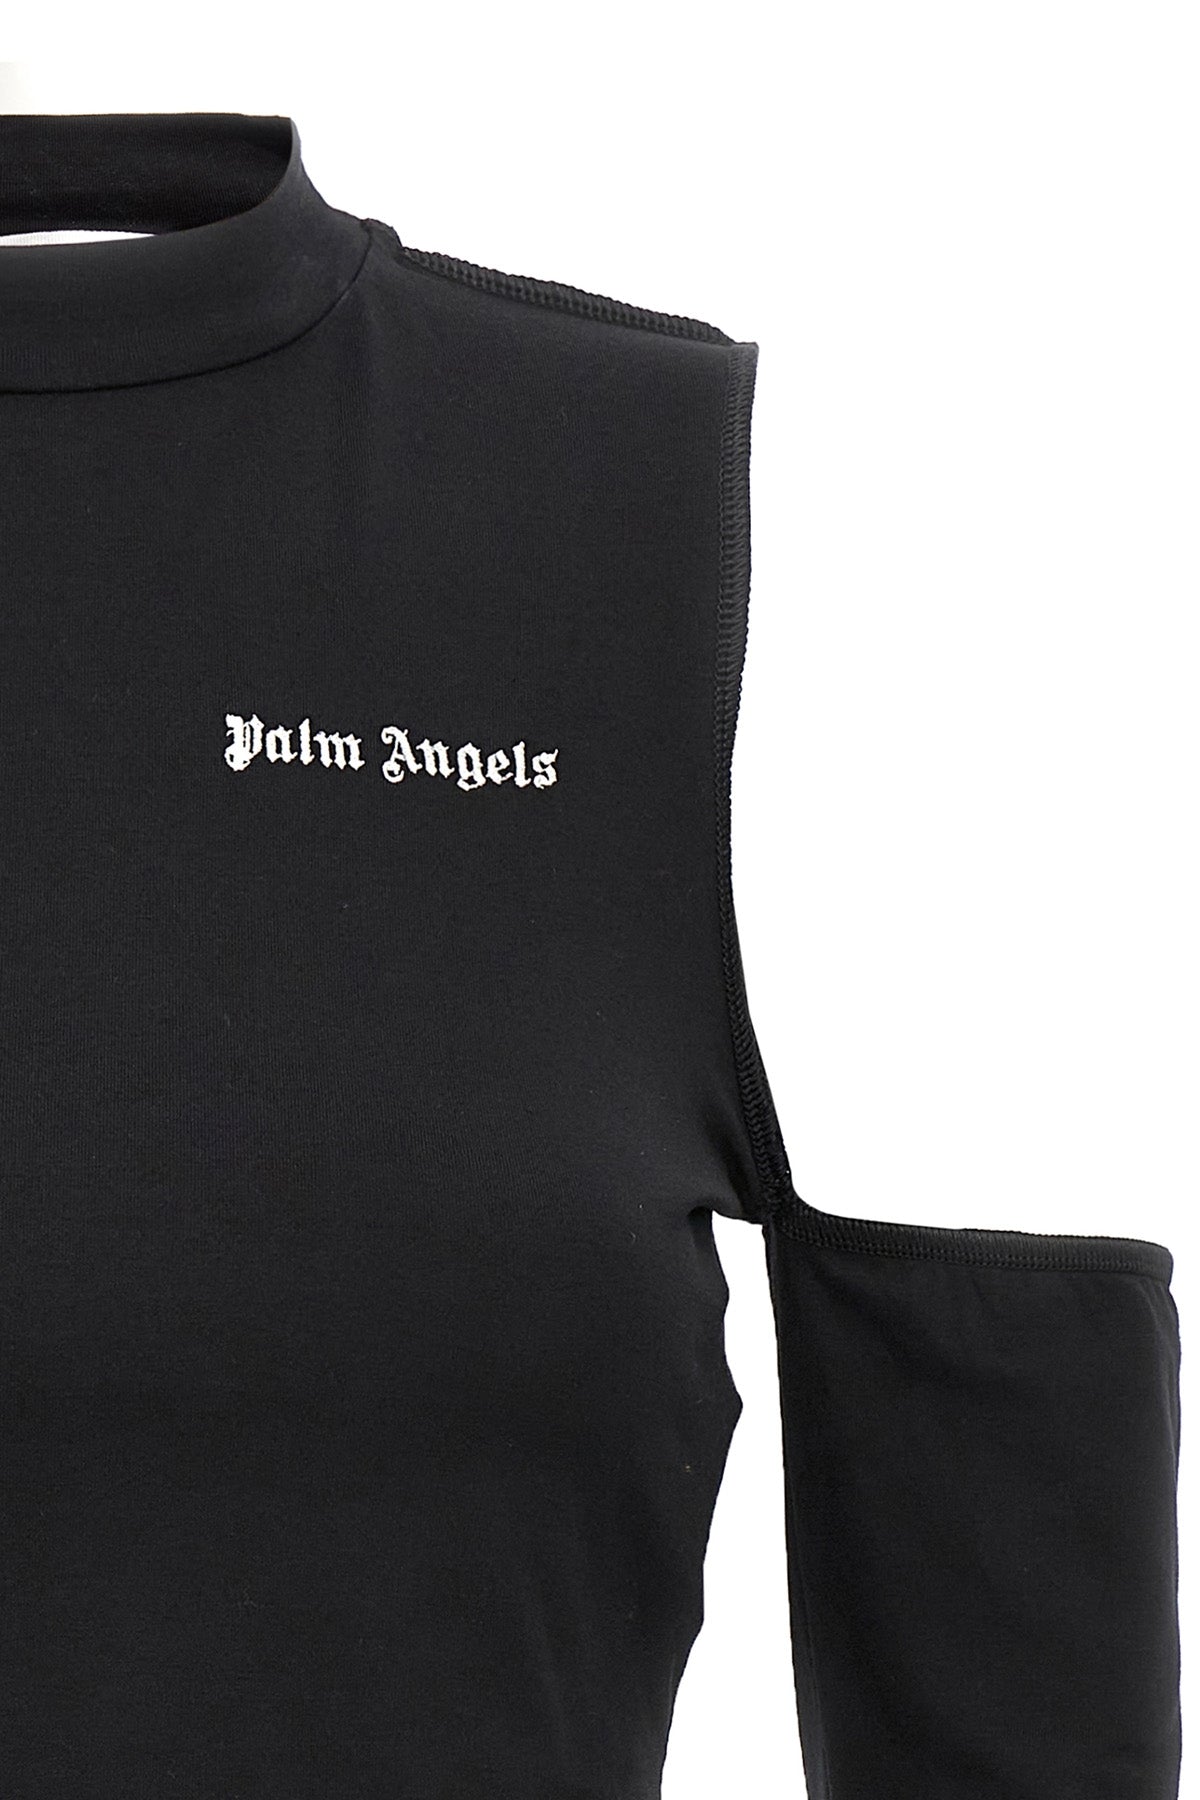 PALM ANGELS TOP CUT OUT